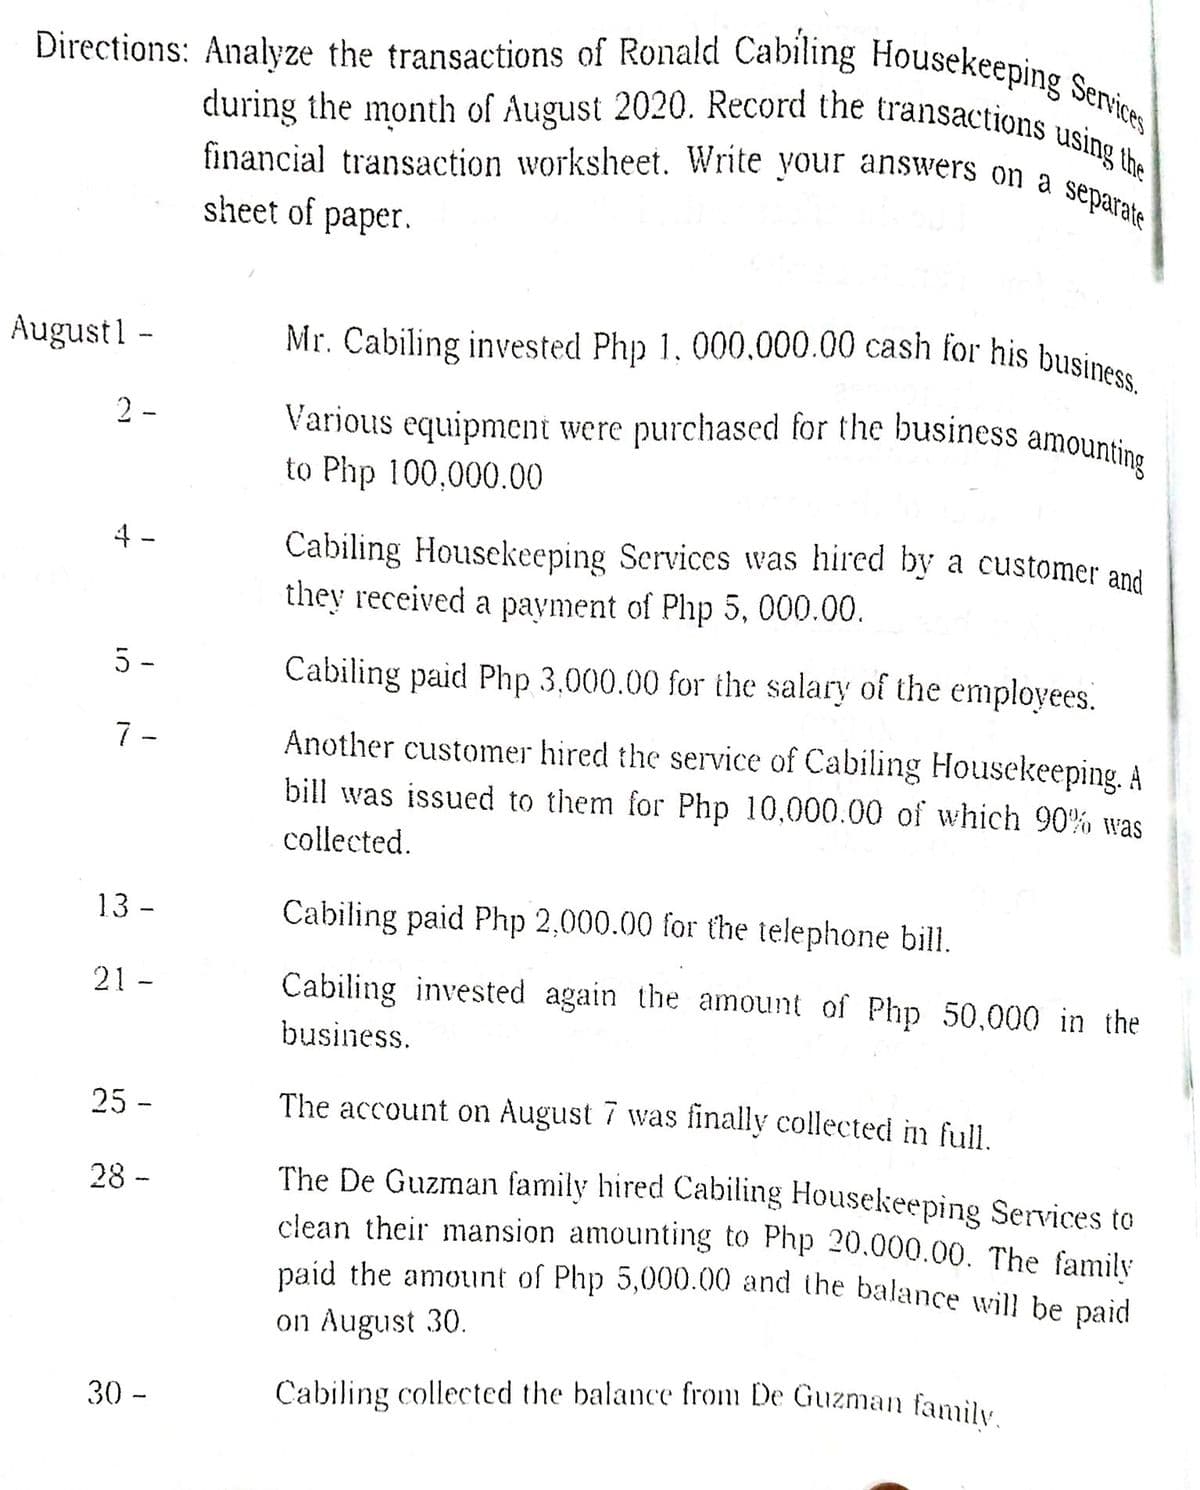 Čabiling collected the balance from De Guzman family.
Mr. Cabiling invested Php 1. 000.000.00 cash for his business.
Various equipment were purchased for the business amounting
during the month of August 2020. Record the transactions using the
Directions: Analyze the transactions of Ronald Cabiling Housekeeping Services
financial transaction worksheet. Write your answers on a separate
sheet of paper.
August1 -
2 -
to Php 100,000.00
4 -
Cabiling Housekeeping Scrvices was hired by a customer and
they received a payment of Php 5, 000.00.
5 -
Cabiling paid Php 3,000.00 for the salary of the employees.
7 -
Another customer hired the service of Cabiling Housekeeping. À
bill was issued to them for Php 10,000.00 of which 90% was
collected.
13 -
Cabiling paid Php 2,000.00 for the telephone bill.
21 -
Cabiling invested again the amount of Php 50,000 in the
business.
25 -
The account on August 7 was finally collected in full.
The De Guzman family hired Cabiling Housekeeping Services to
clean their mansion amounting to Php 20,000.00. The family
paid the amount of Php 5,000.00 and the balance will be paid
28 -
on August 30.
30 -
